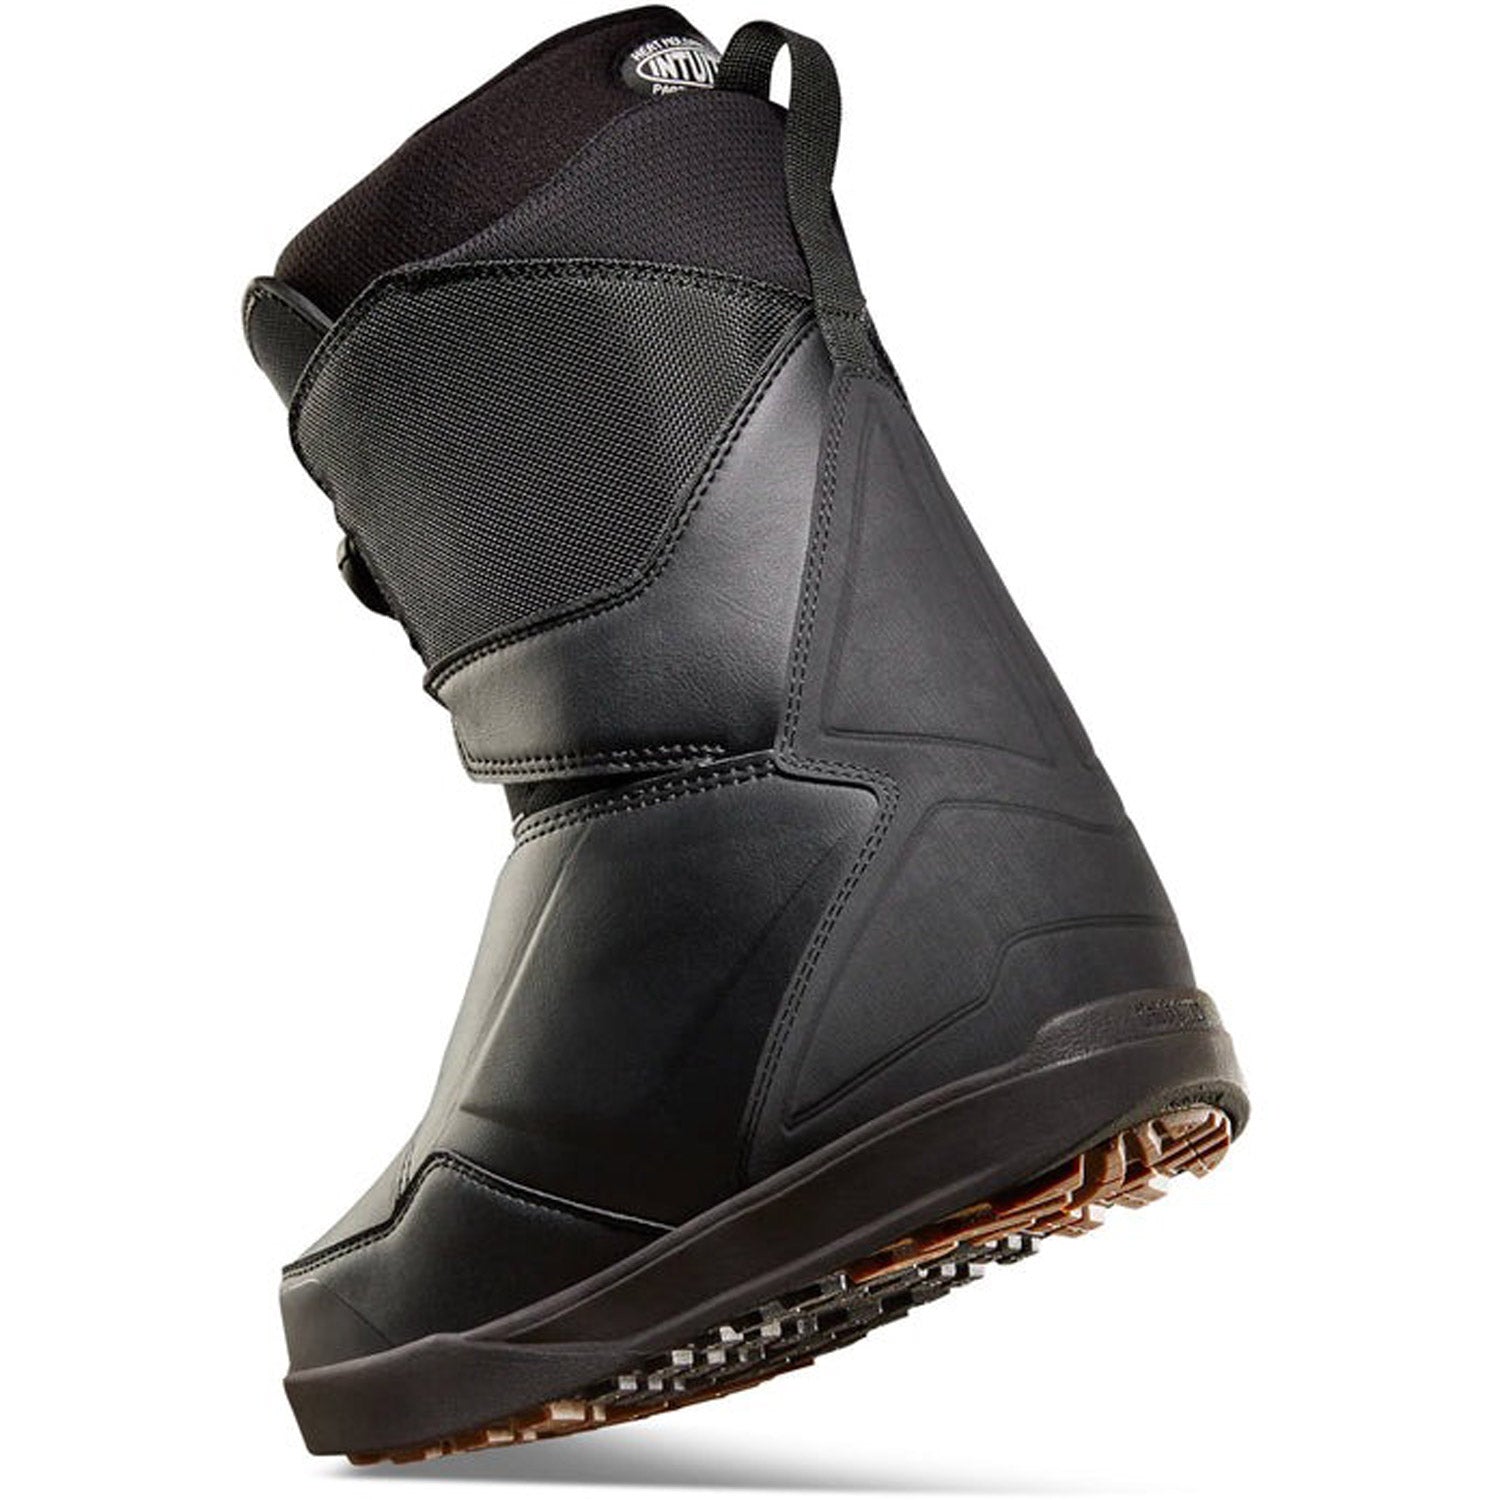 Lashed Double BOA Snowboard Boots